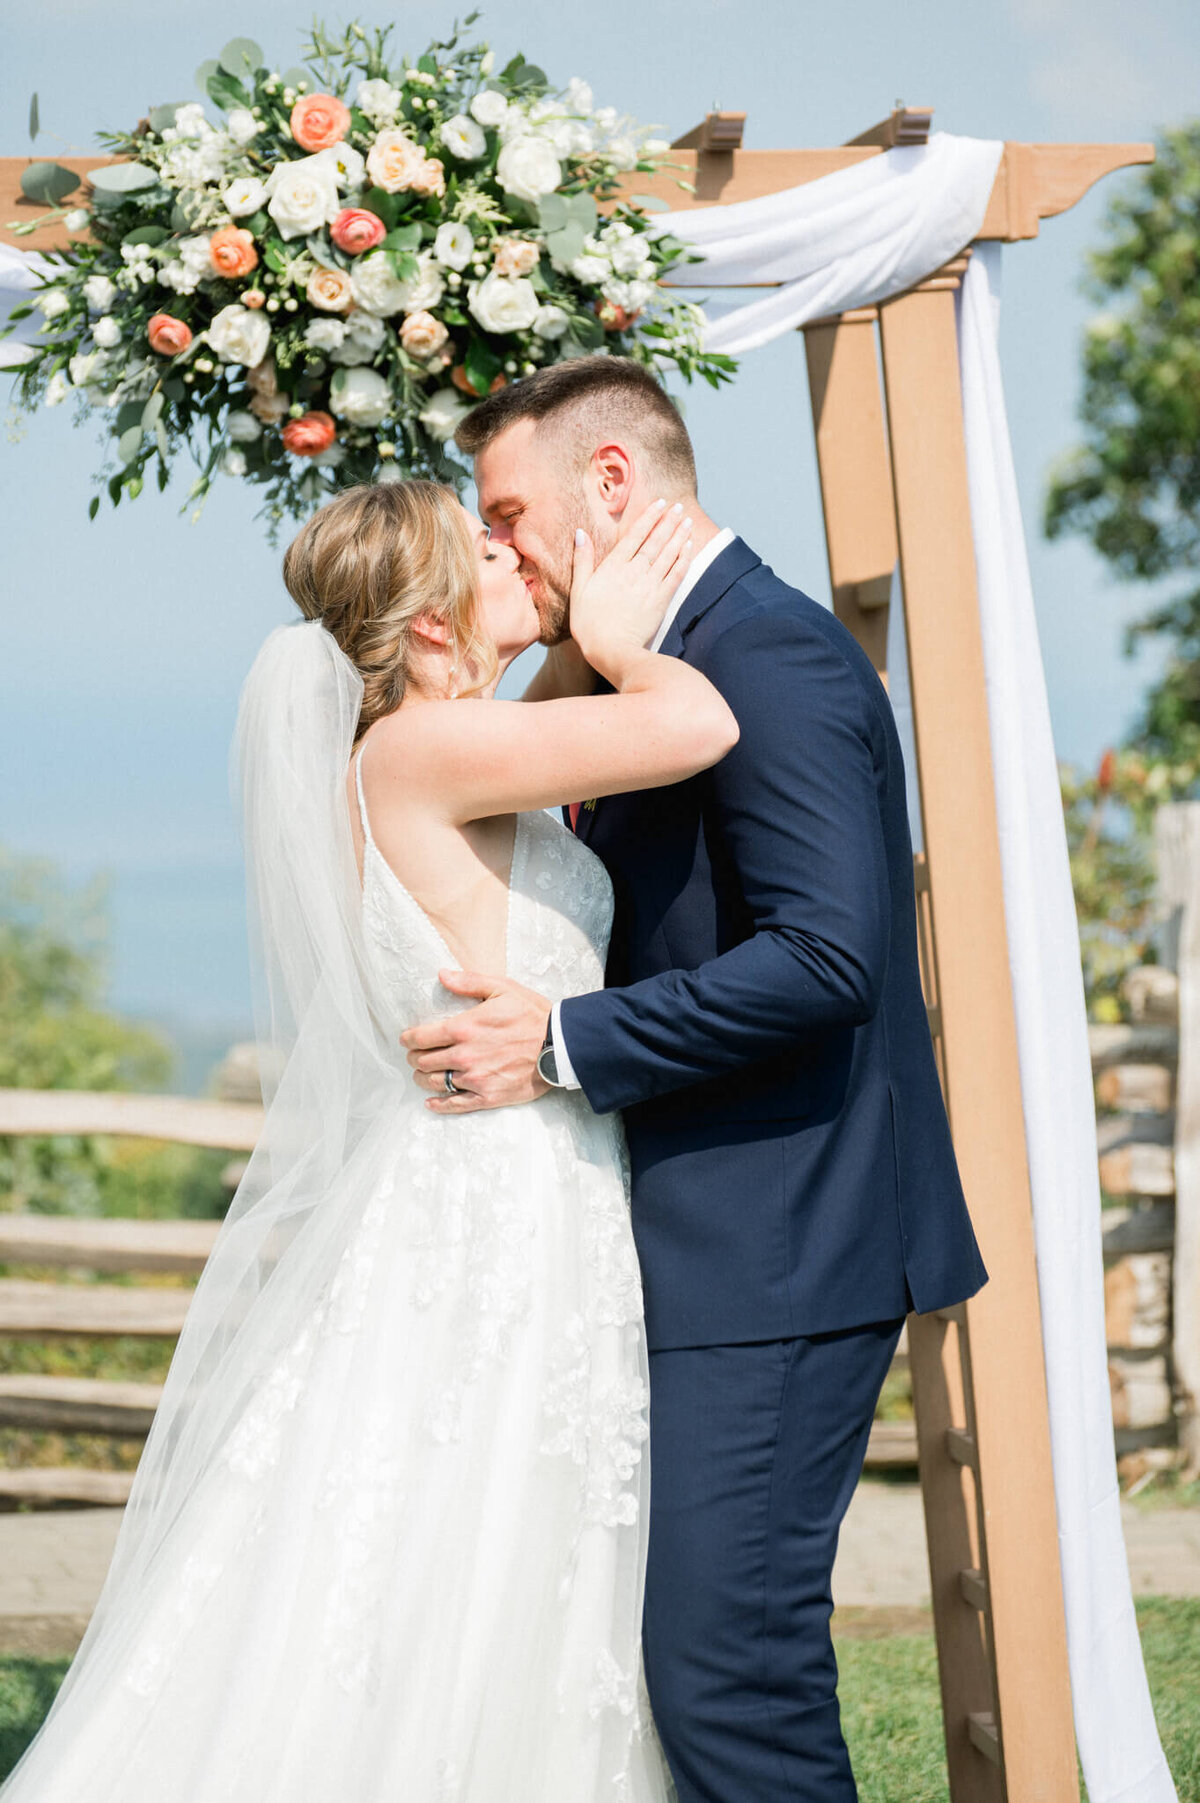 Bride and groom kiss celebrating their marriage. Captured by Toronto wedding photographer Kristine Marie Photography